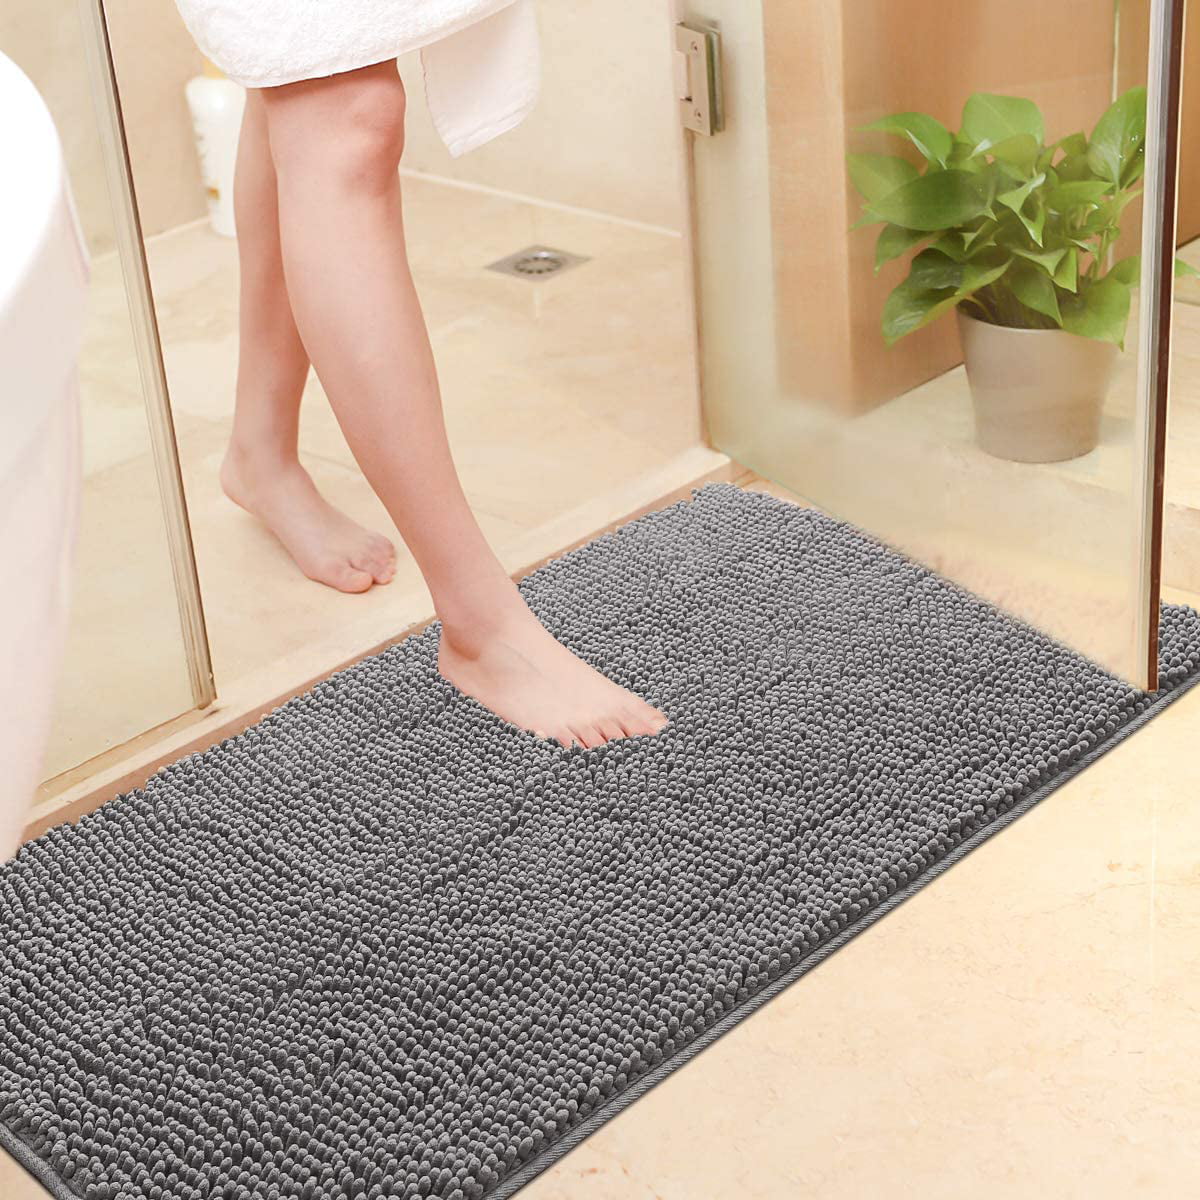 DweIke Chenille Bathroom Mats with Non-Slip Backing Machine Washable Indoor Durable Rug 24 inchx36 inch,Gray, Size: 24 x 36